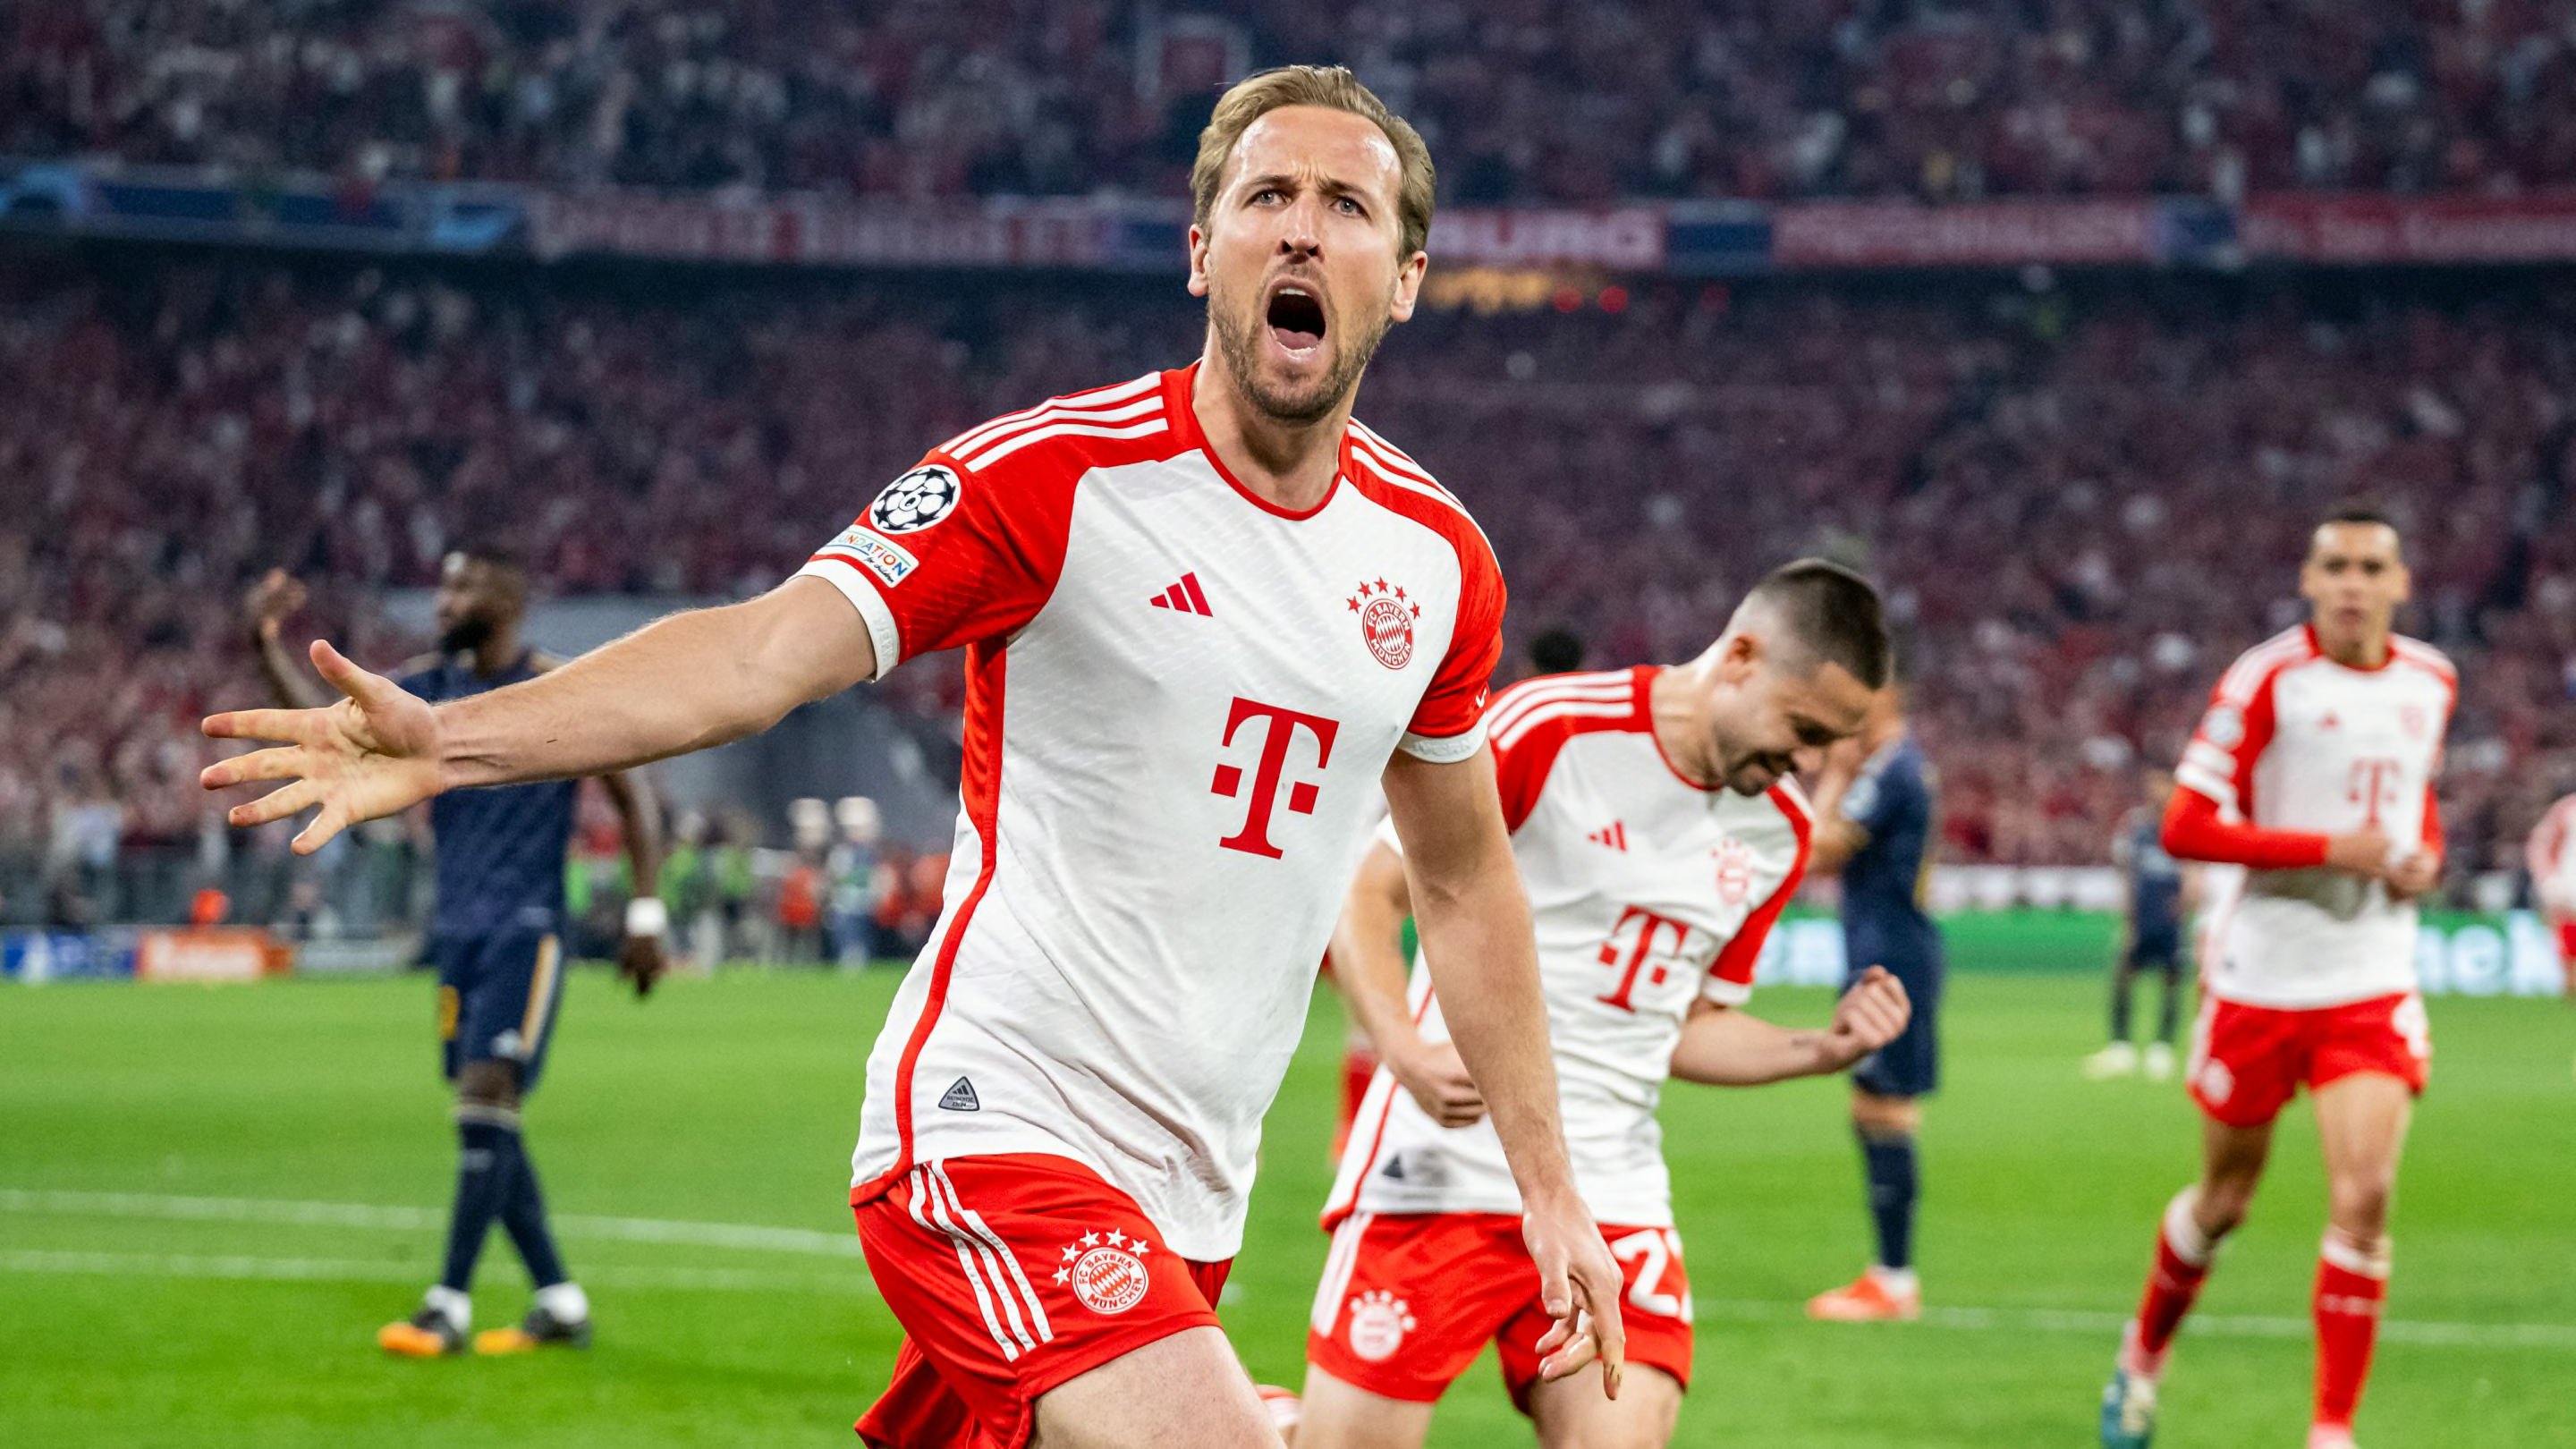 5 takeaways from Bayern Munich's 2-2 draw with Real Madrid in the Champions League